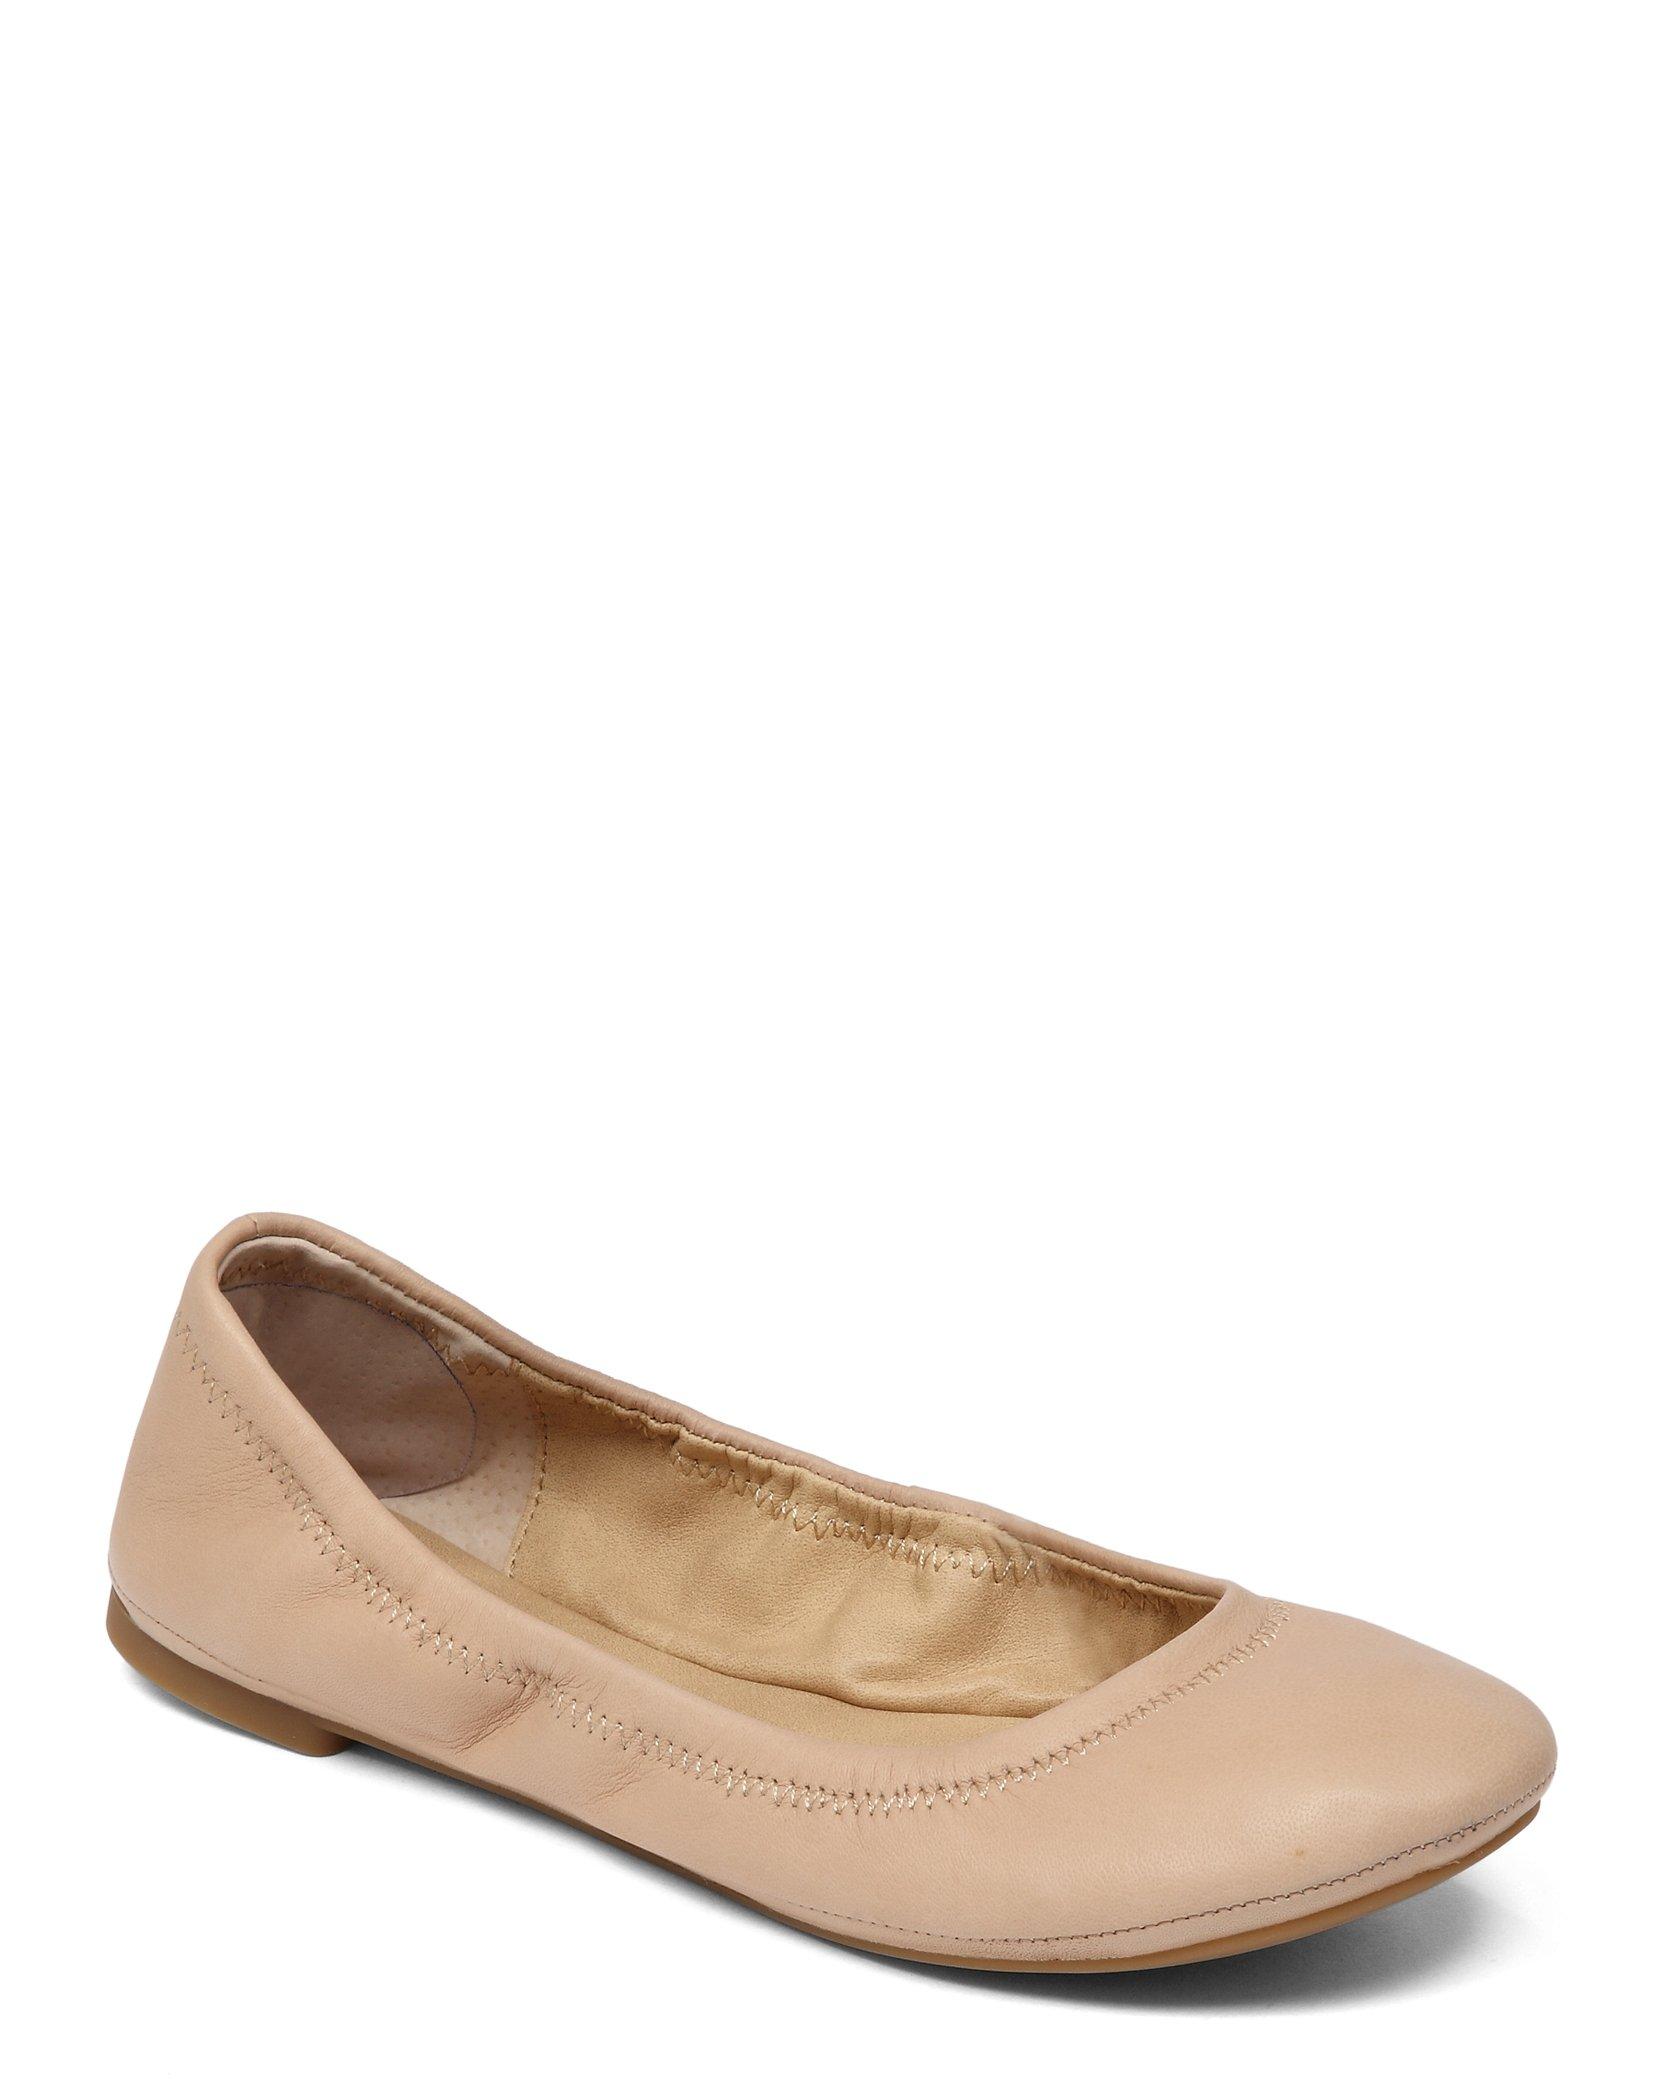 EMMIE LEATHER FLATS, image 1